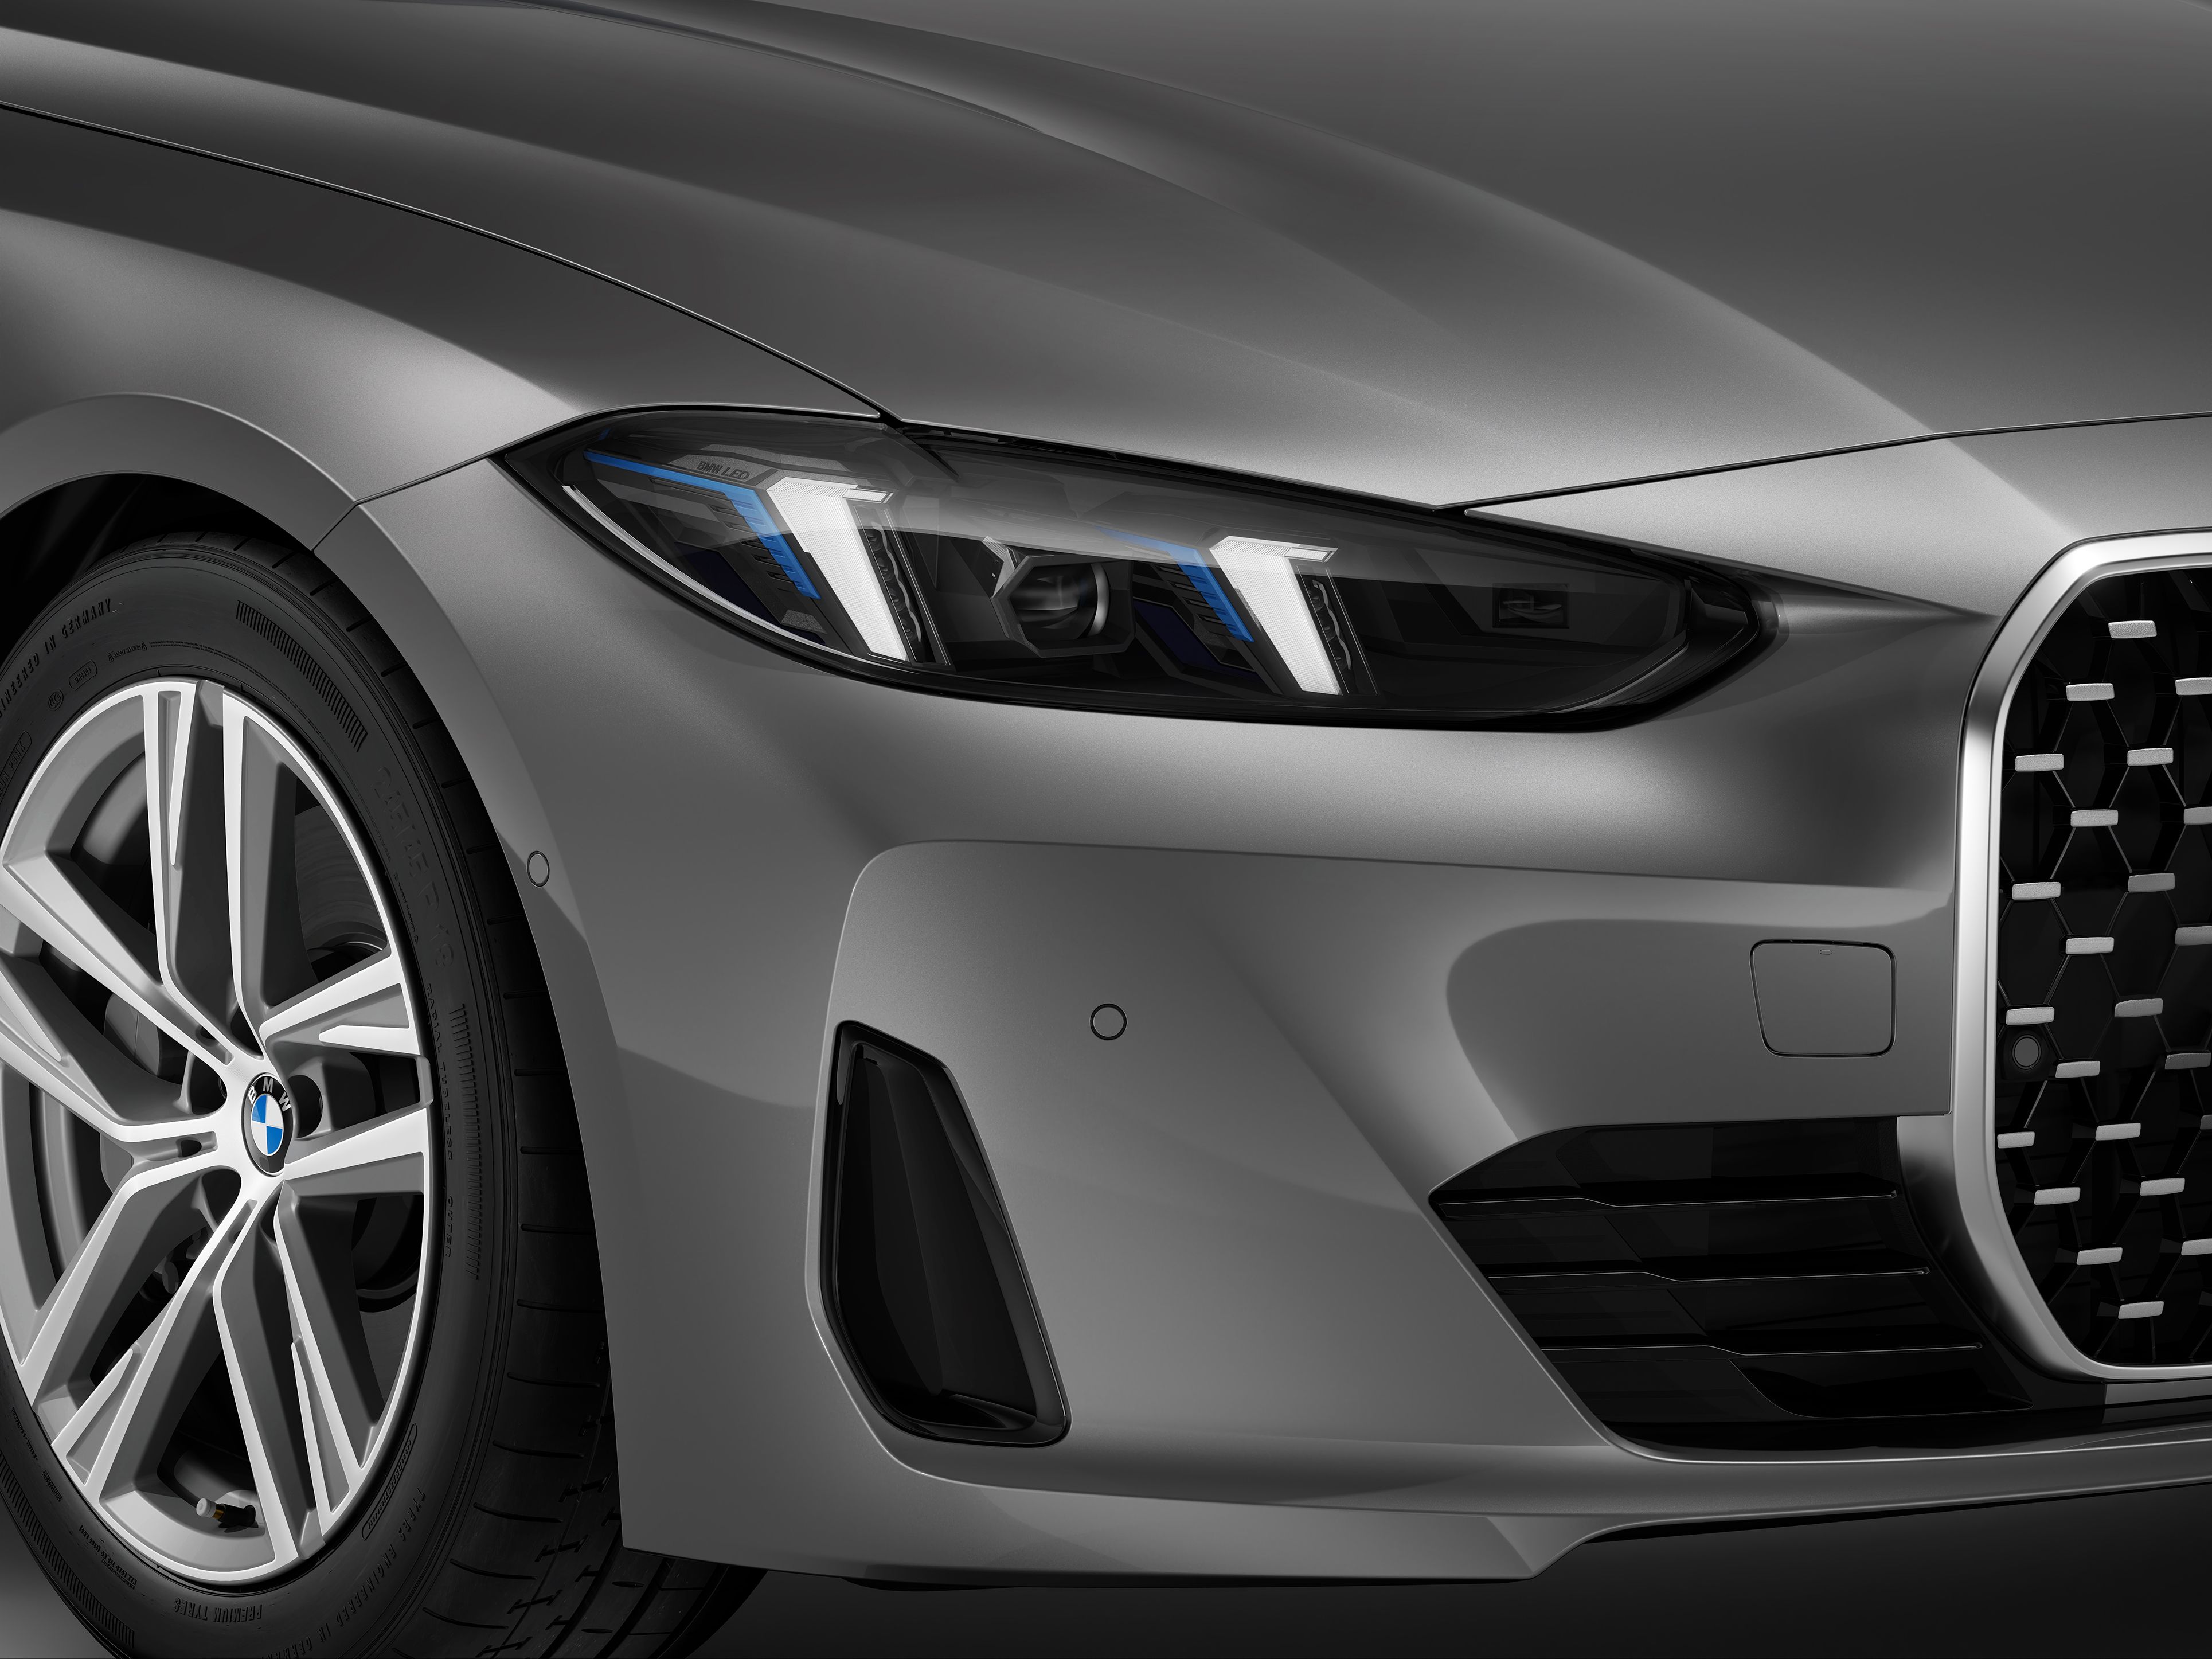 Adaptive LED Headlights on the BMW 4 Series Gran Coupe